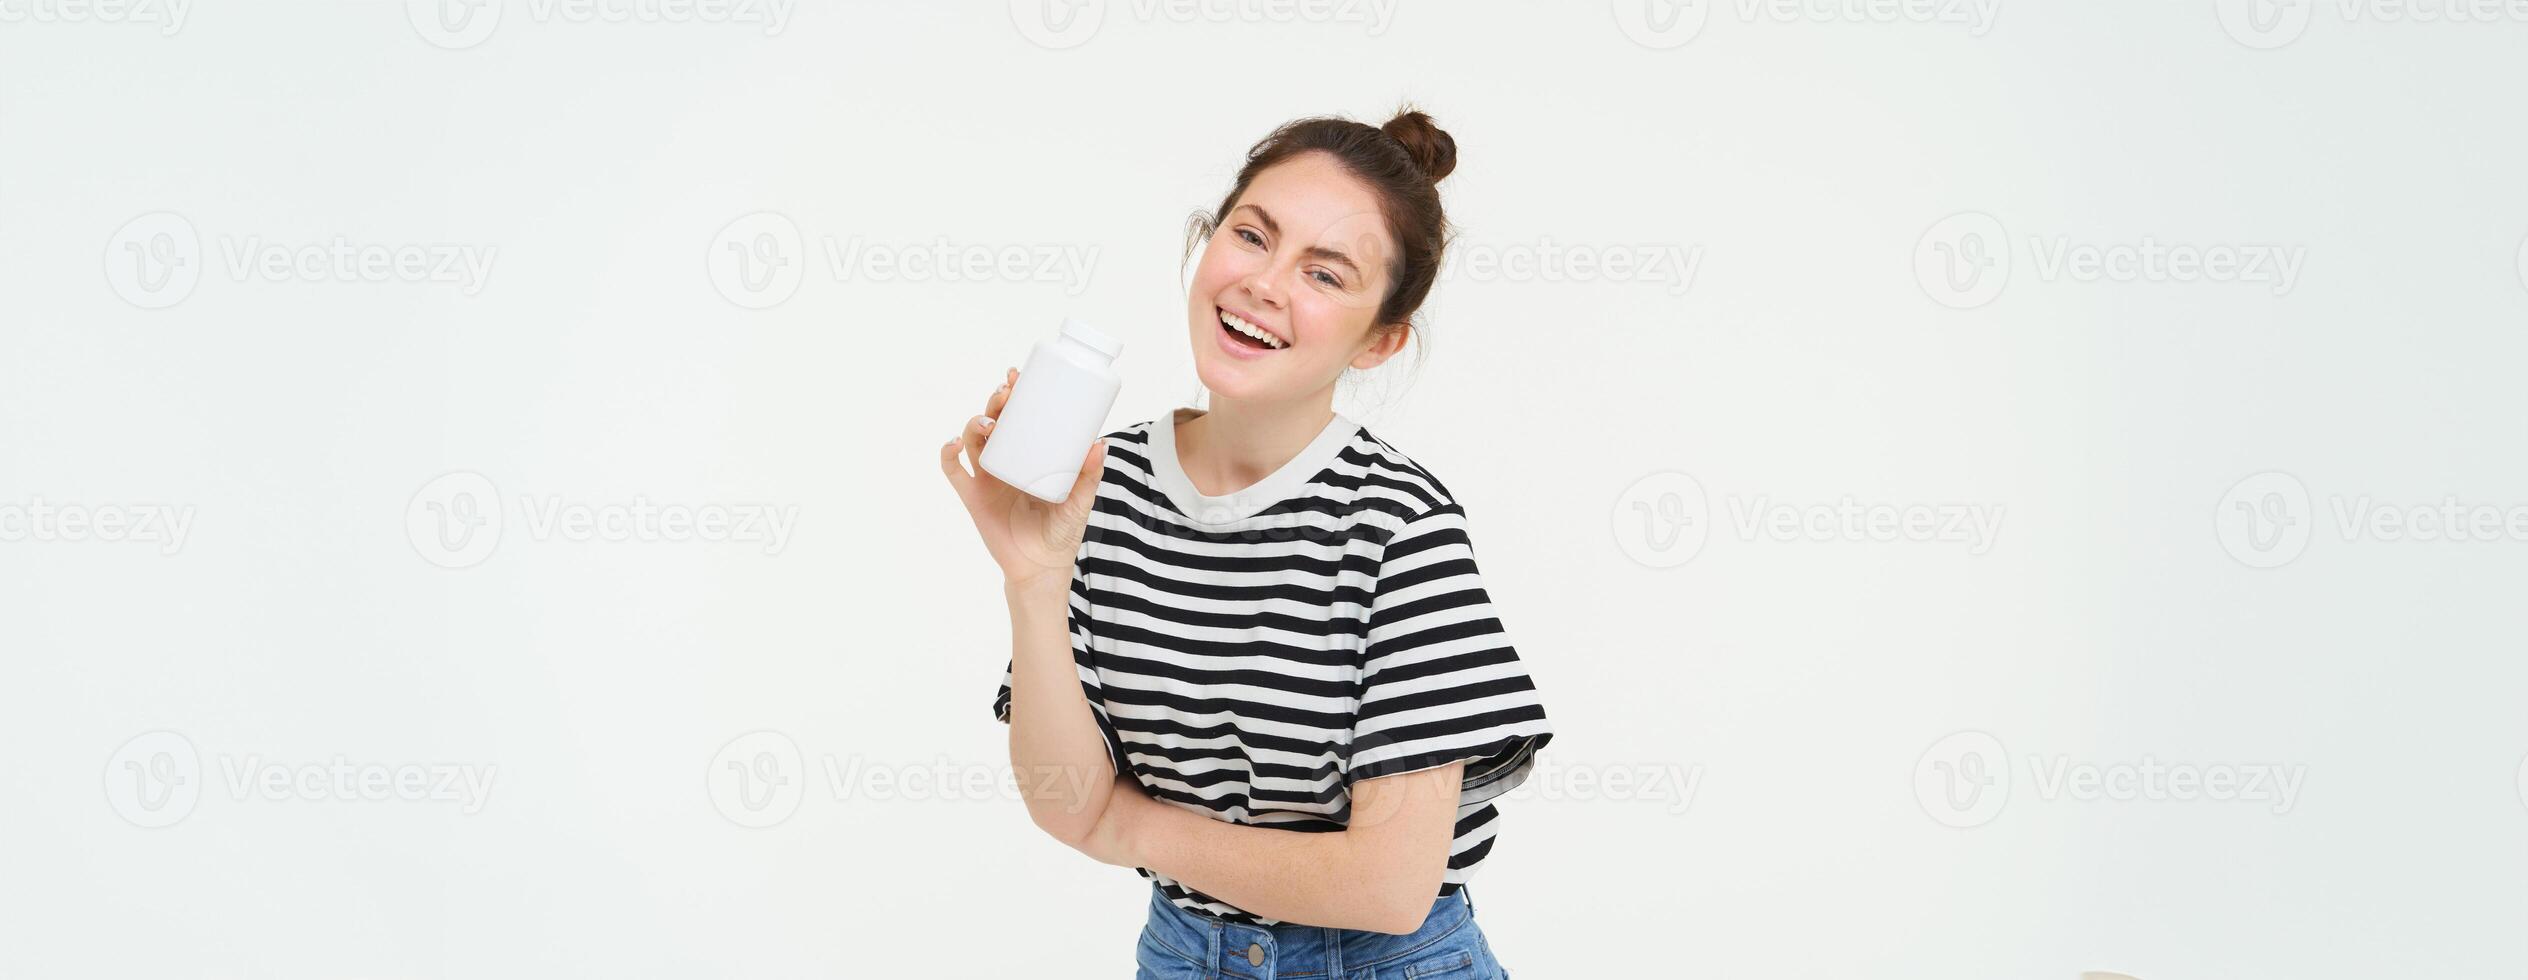 Healthcare and wellbeing. Young woman holding bottle with vitamins, dietary supplements, treatment for good skin and hair, standing over white background photo